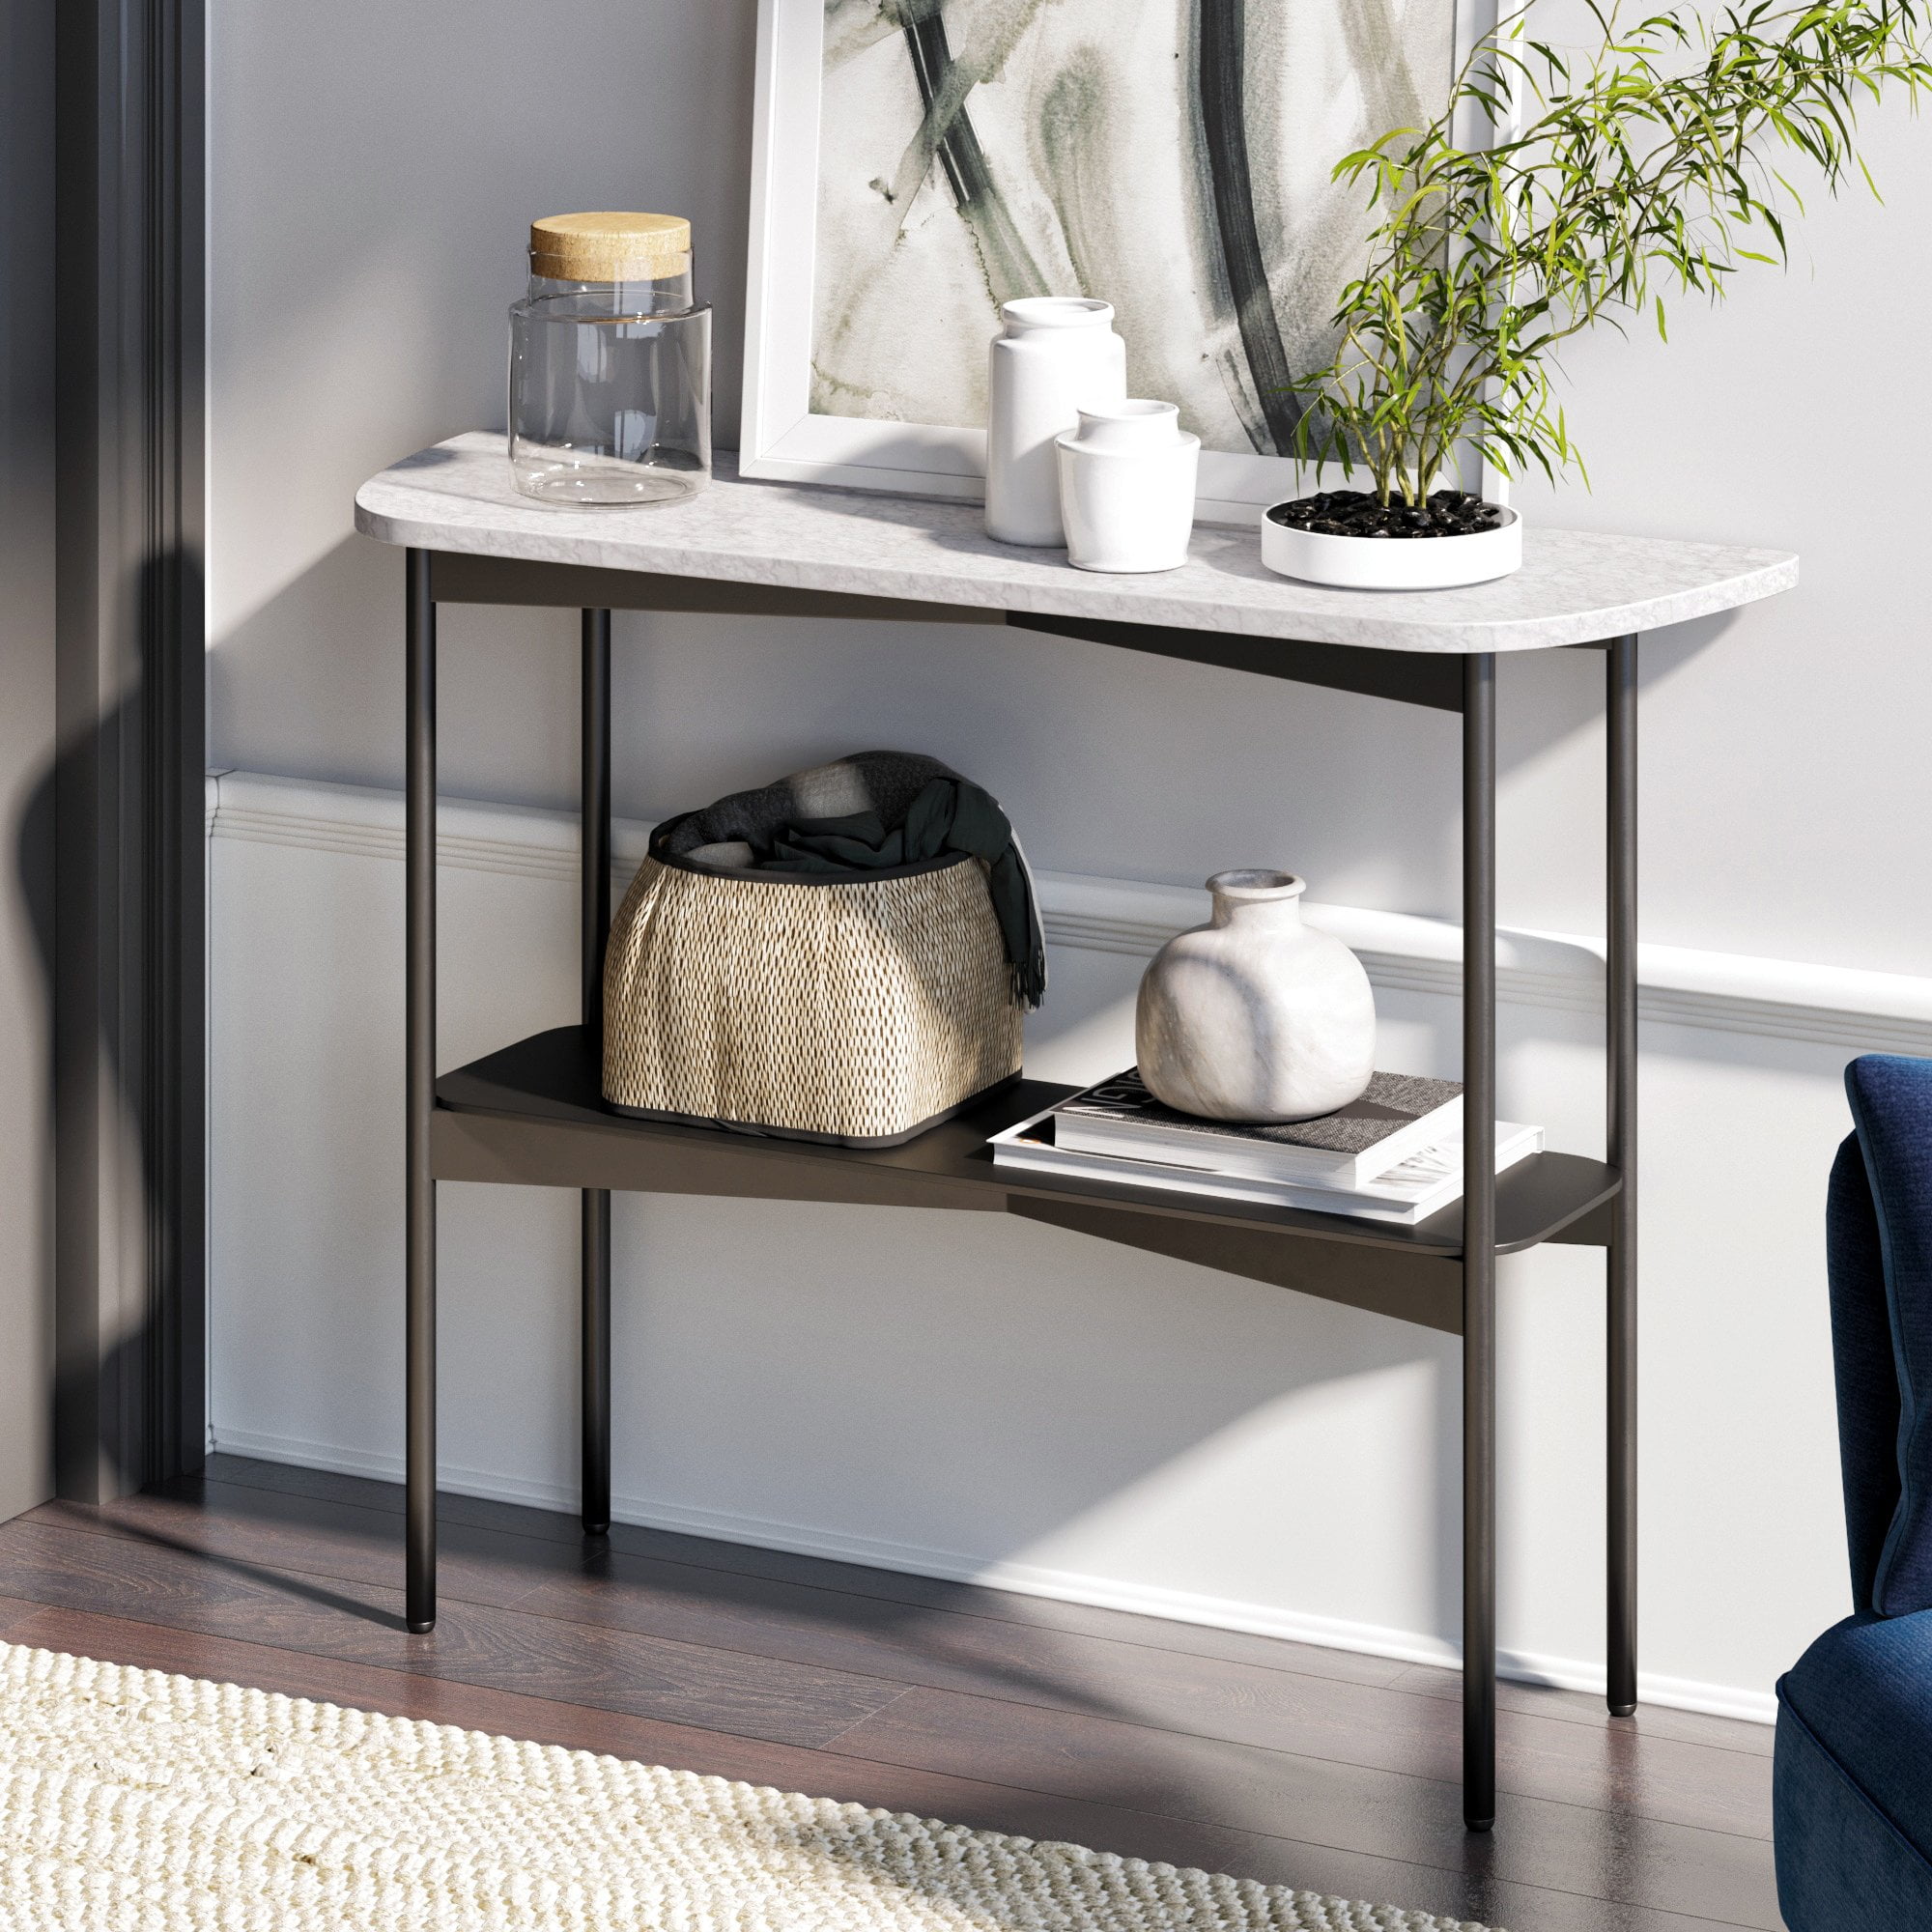 Choochoo Narrow Console Table For Entryway Tall Entryway Table For